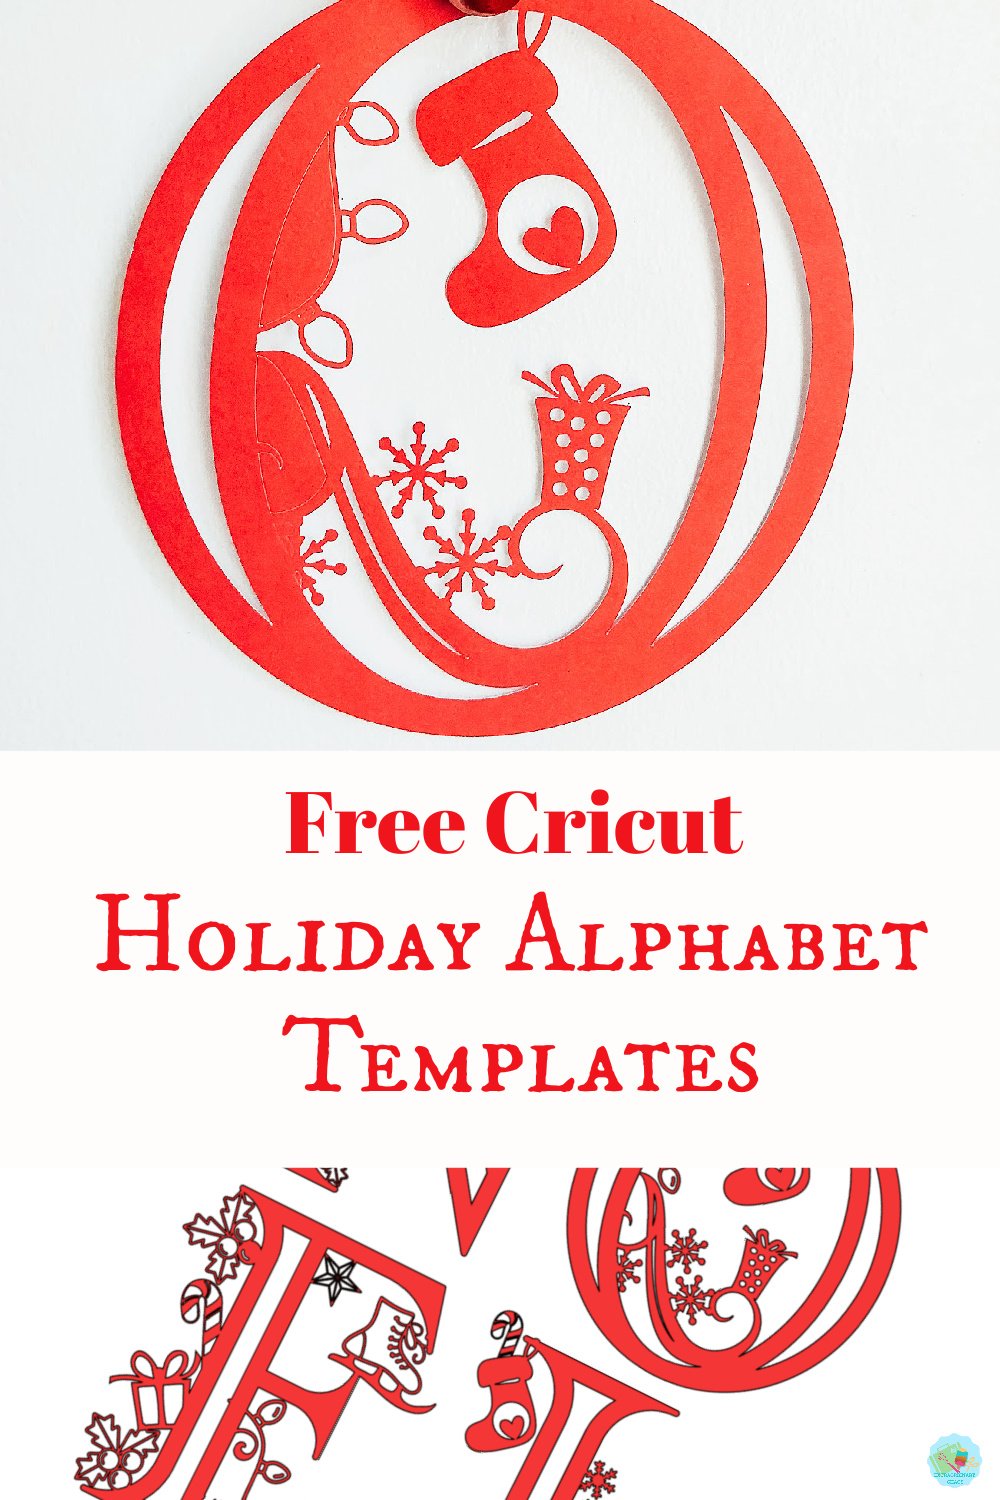 Free Cricut Holiday Template for Christmas craft projects on paper and vinyl to make gifts of craft projects to sell -3